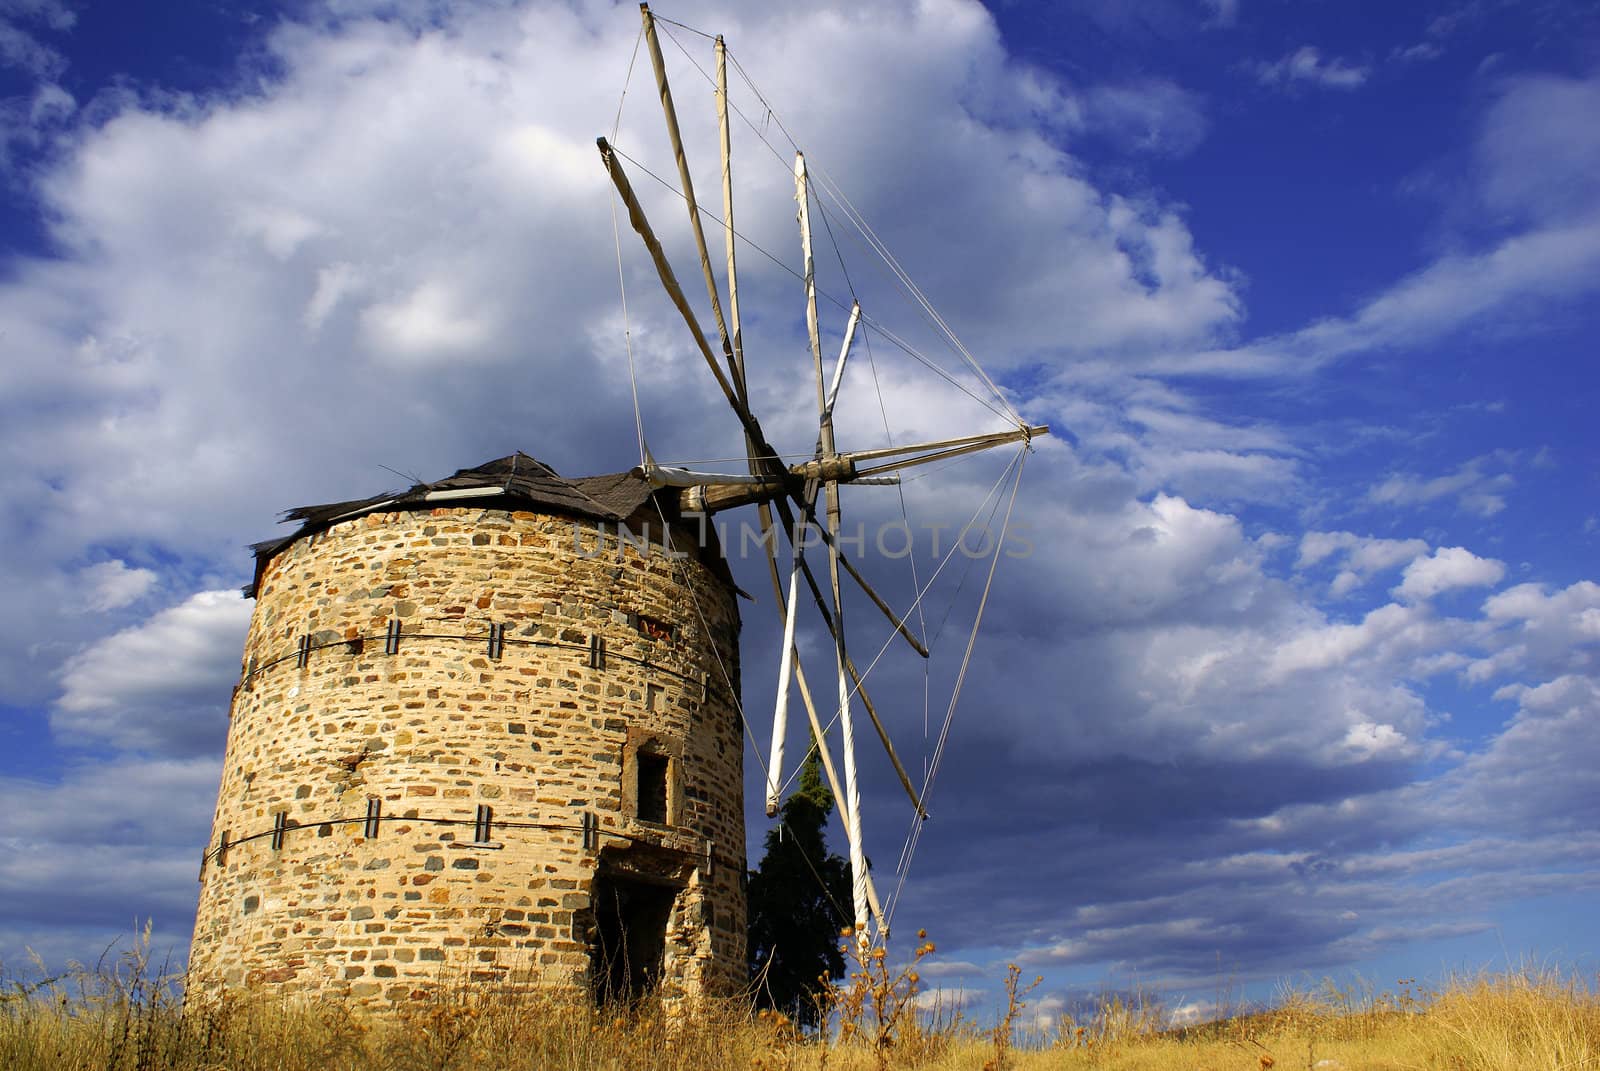 An old windmill in Ormylia (Halkidiki) on a cloudy day in July.